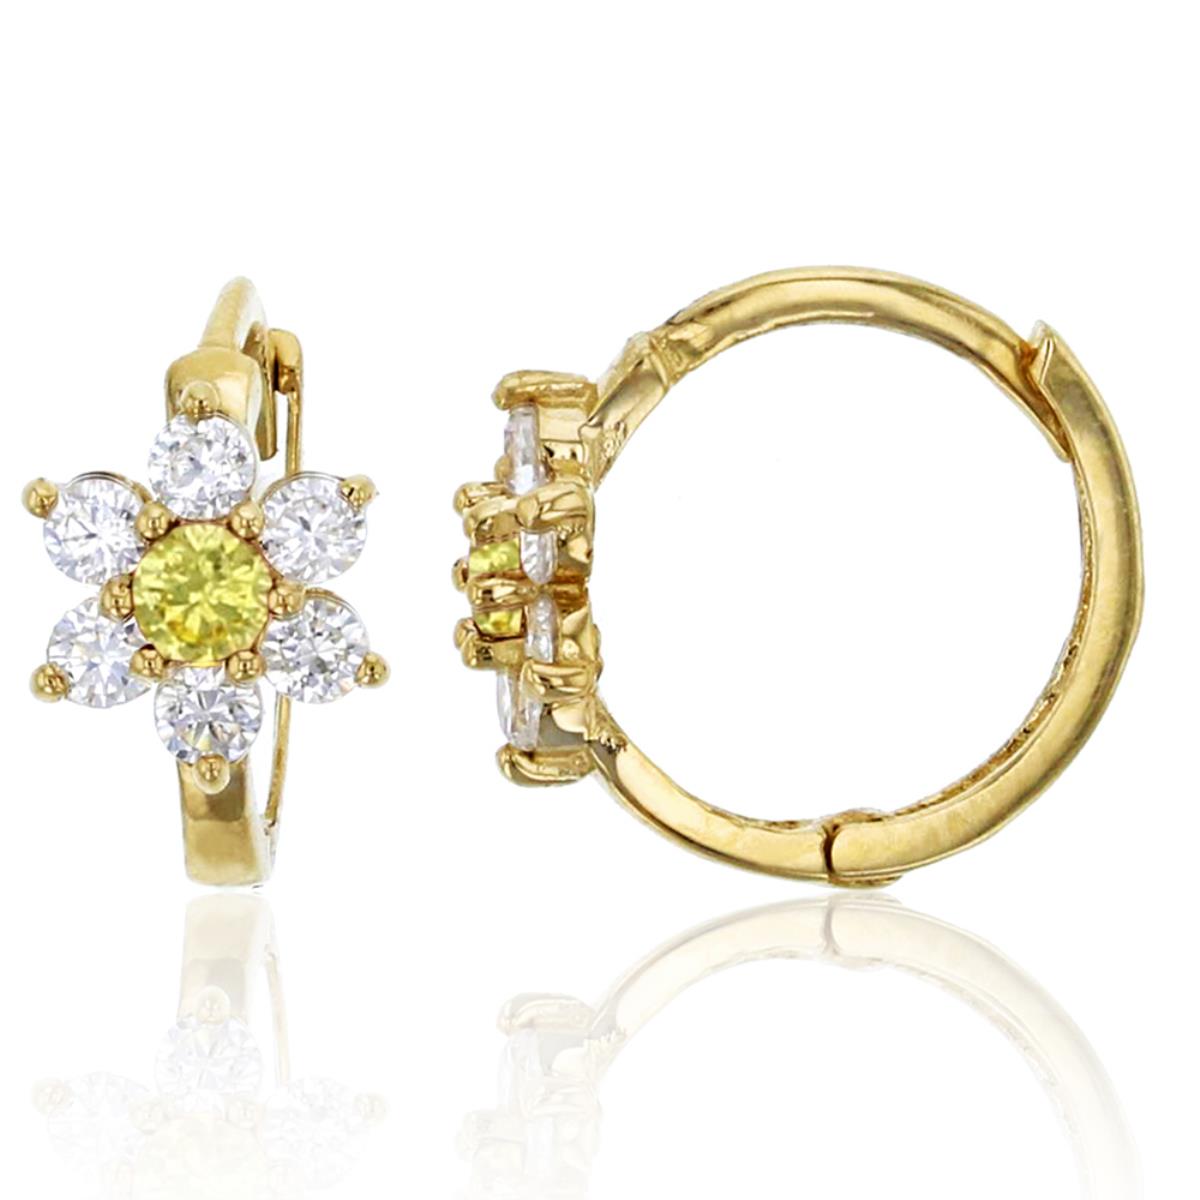 14K Yellow Gold 6.5x10mm Clear and Yellow CZ Daisy Flower Huggie Earring